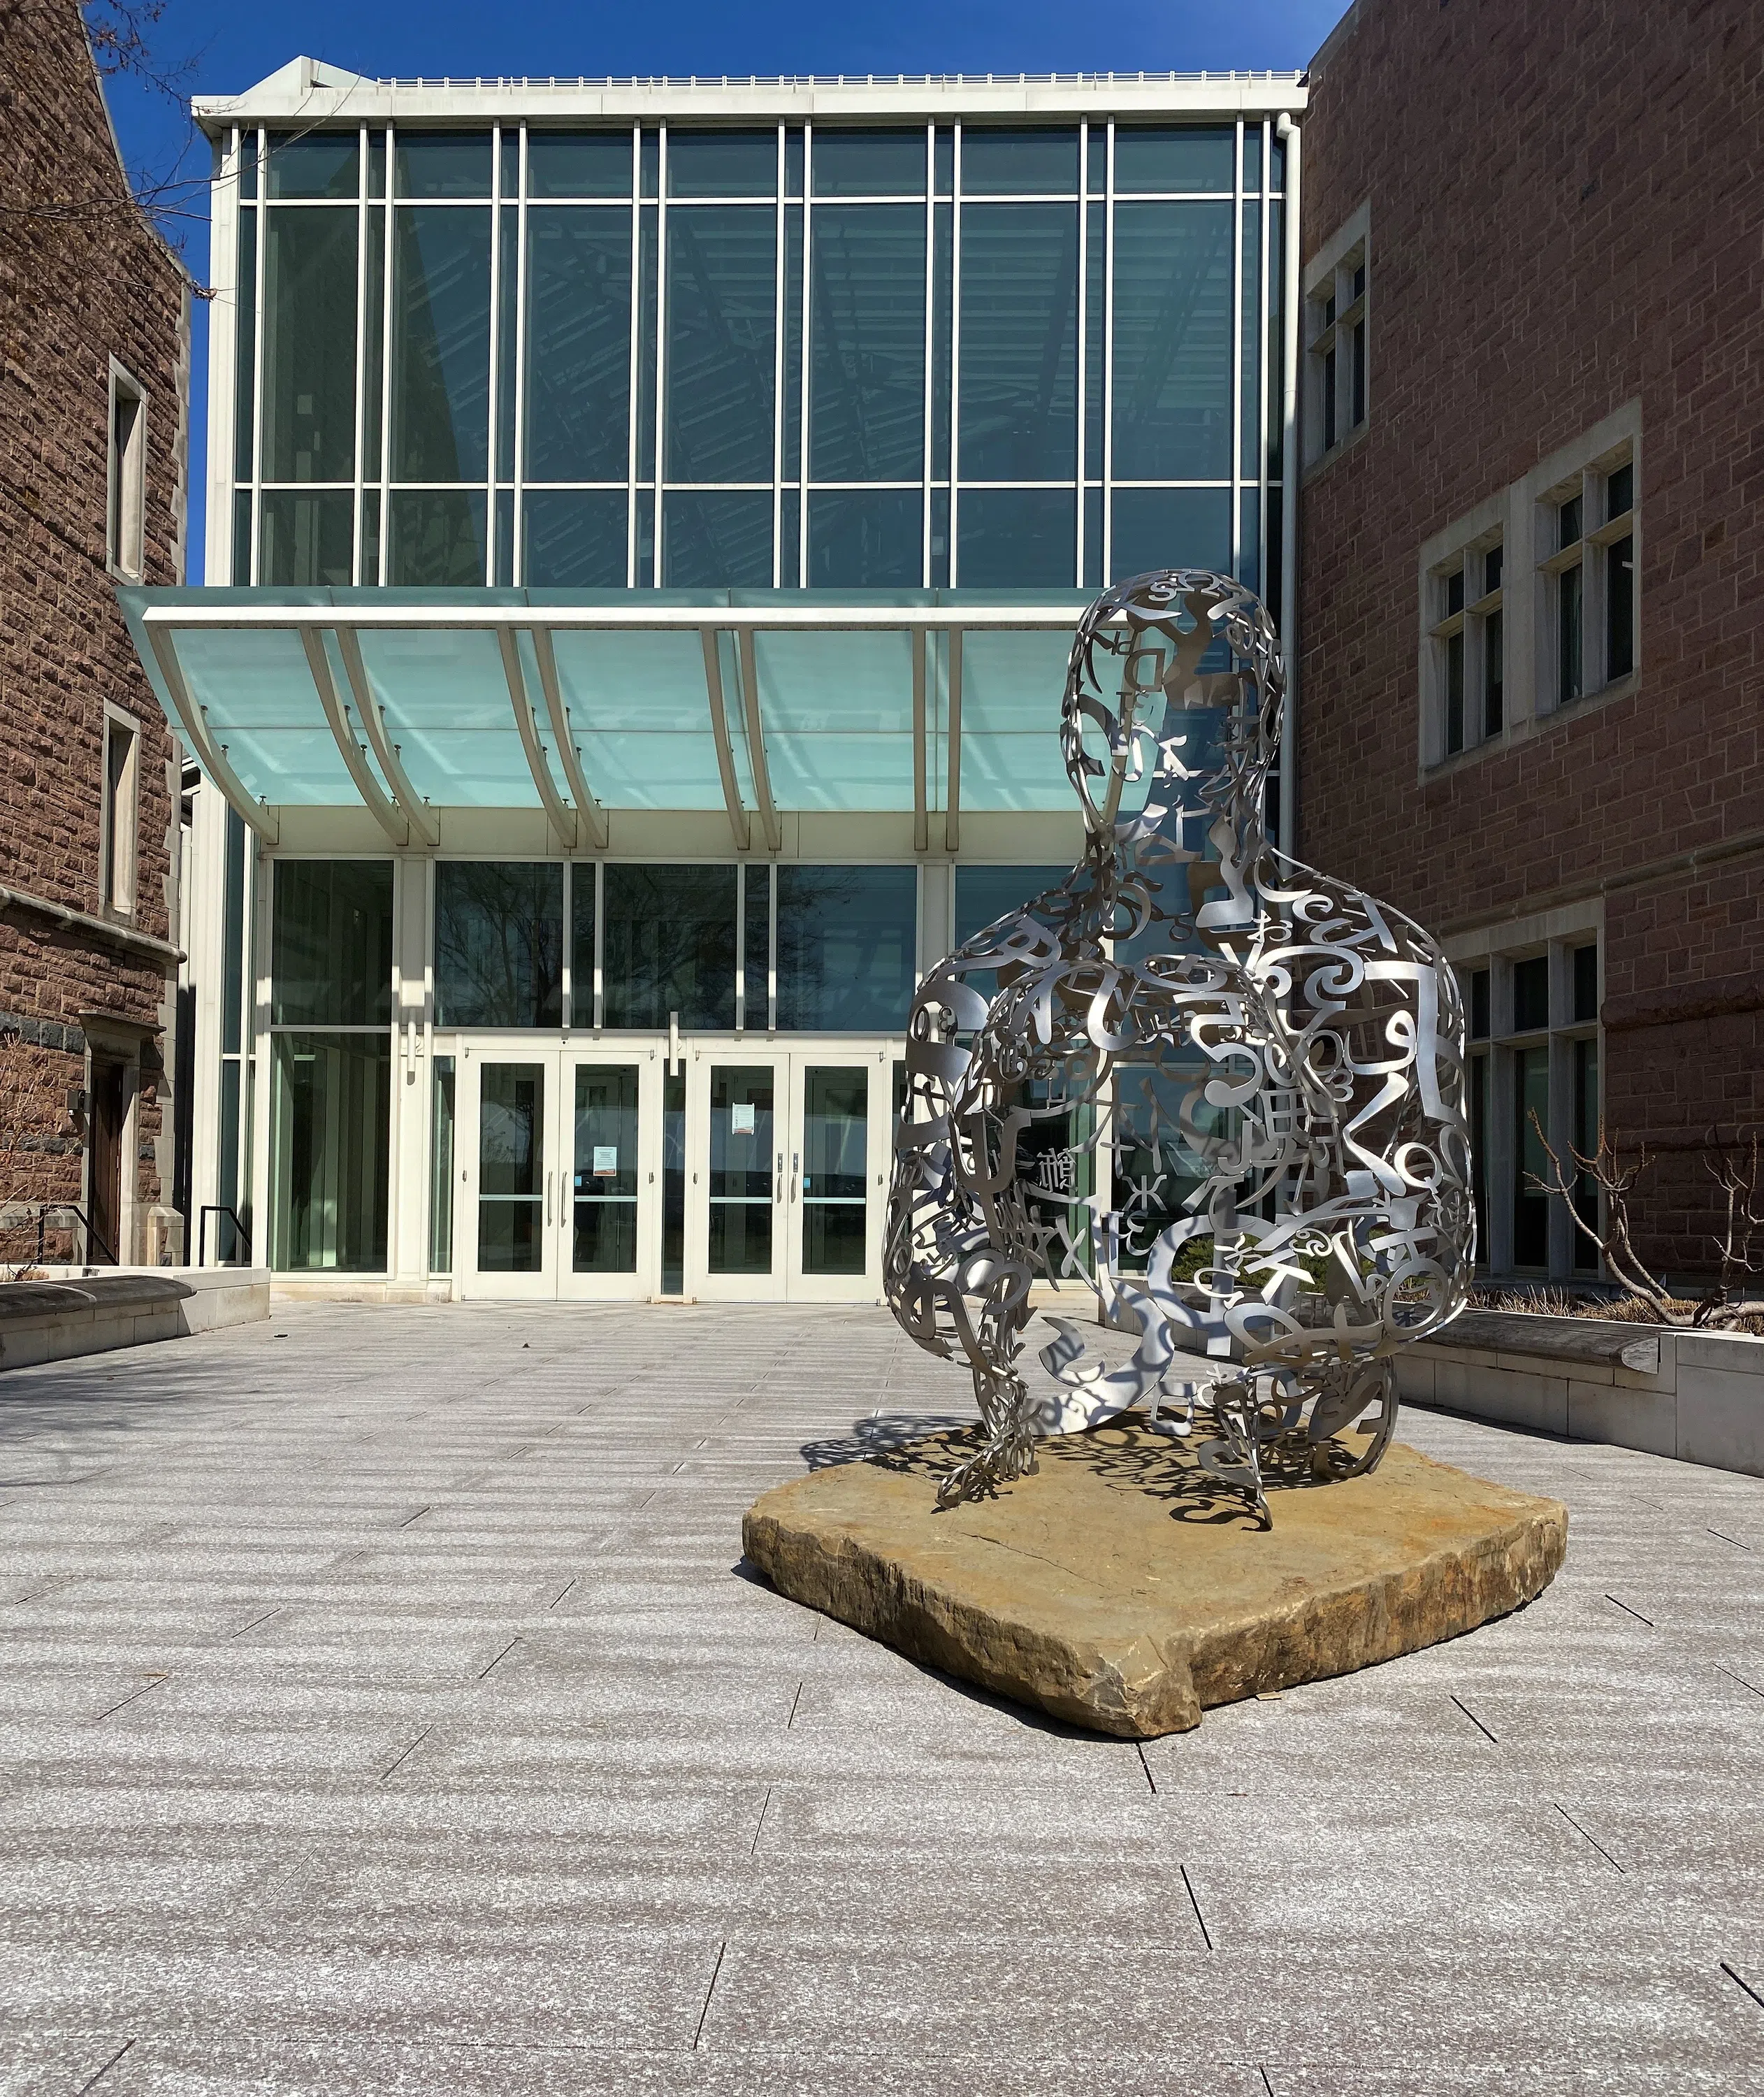 A wire-like sculpture, consisting of various numbers and symbols, of a person sitting on the ground with their knees towards their chest sits outside of Bauer Hall, directly in front of a set of glass doors.